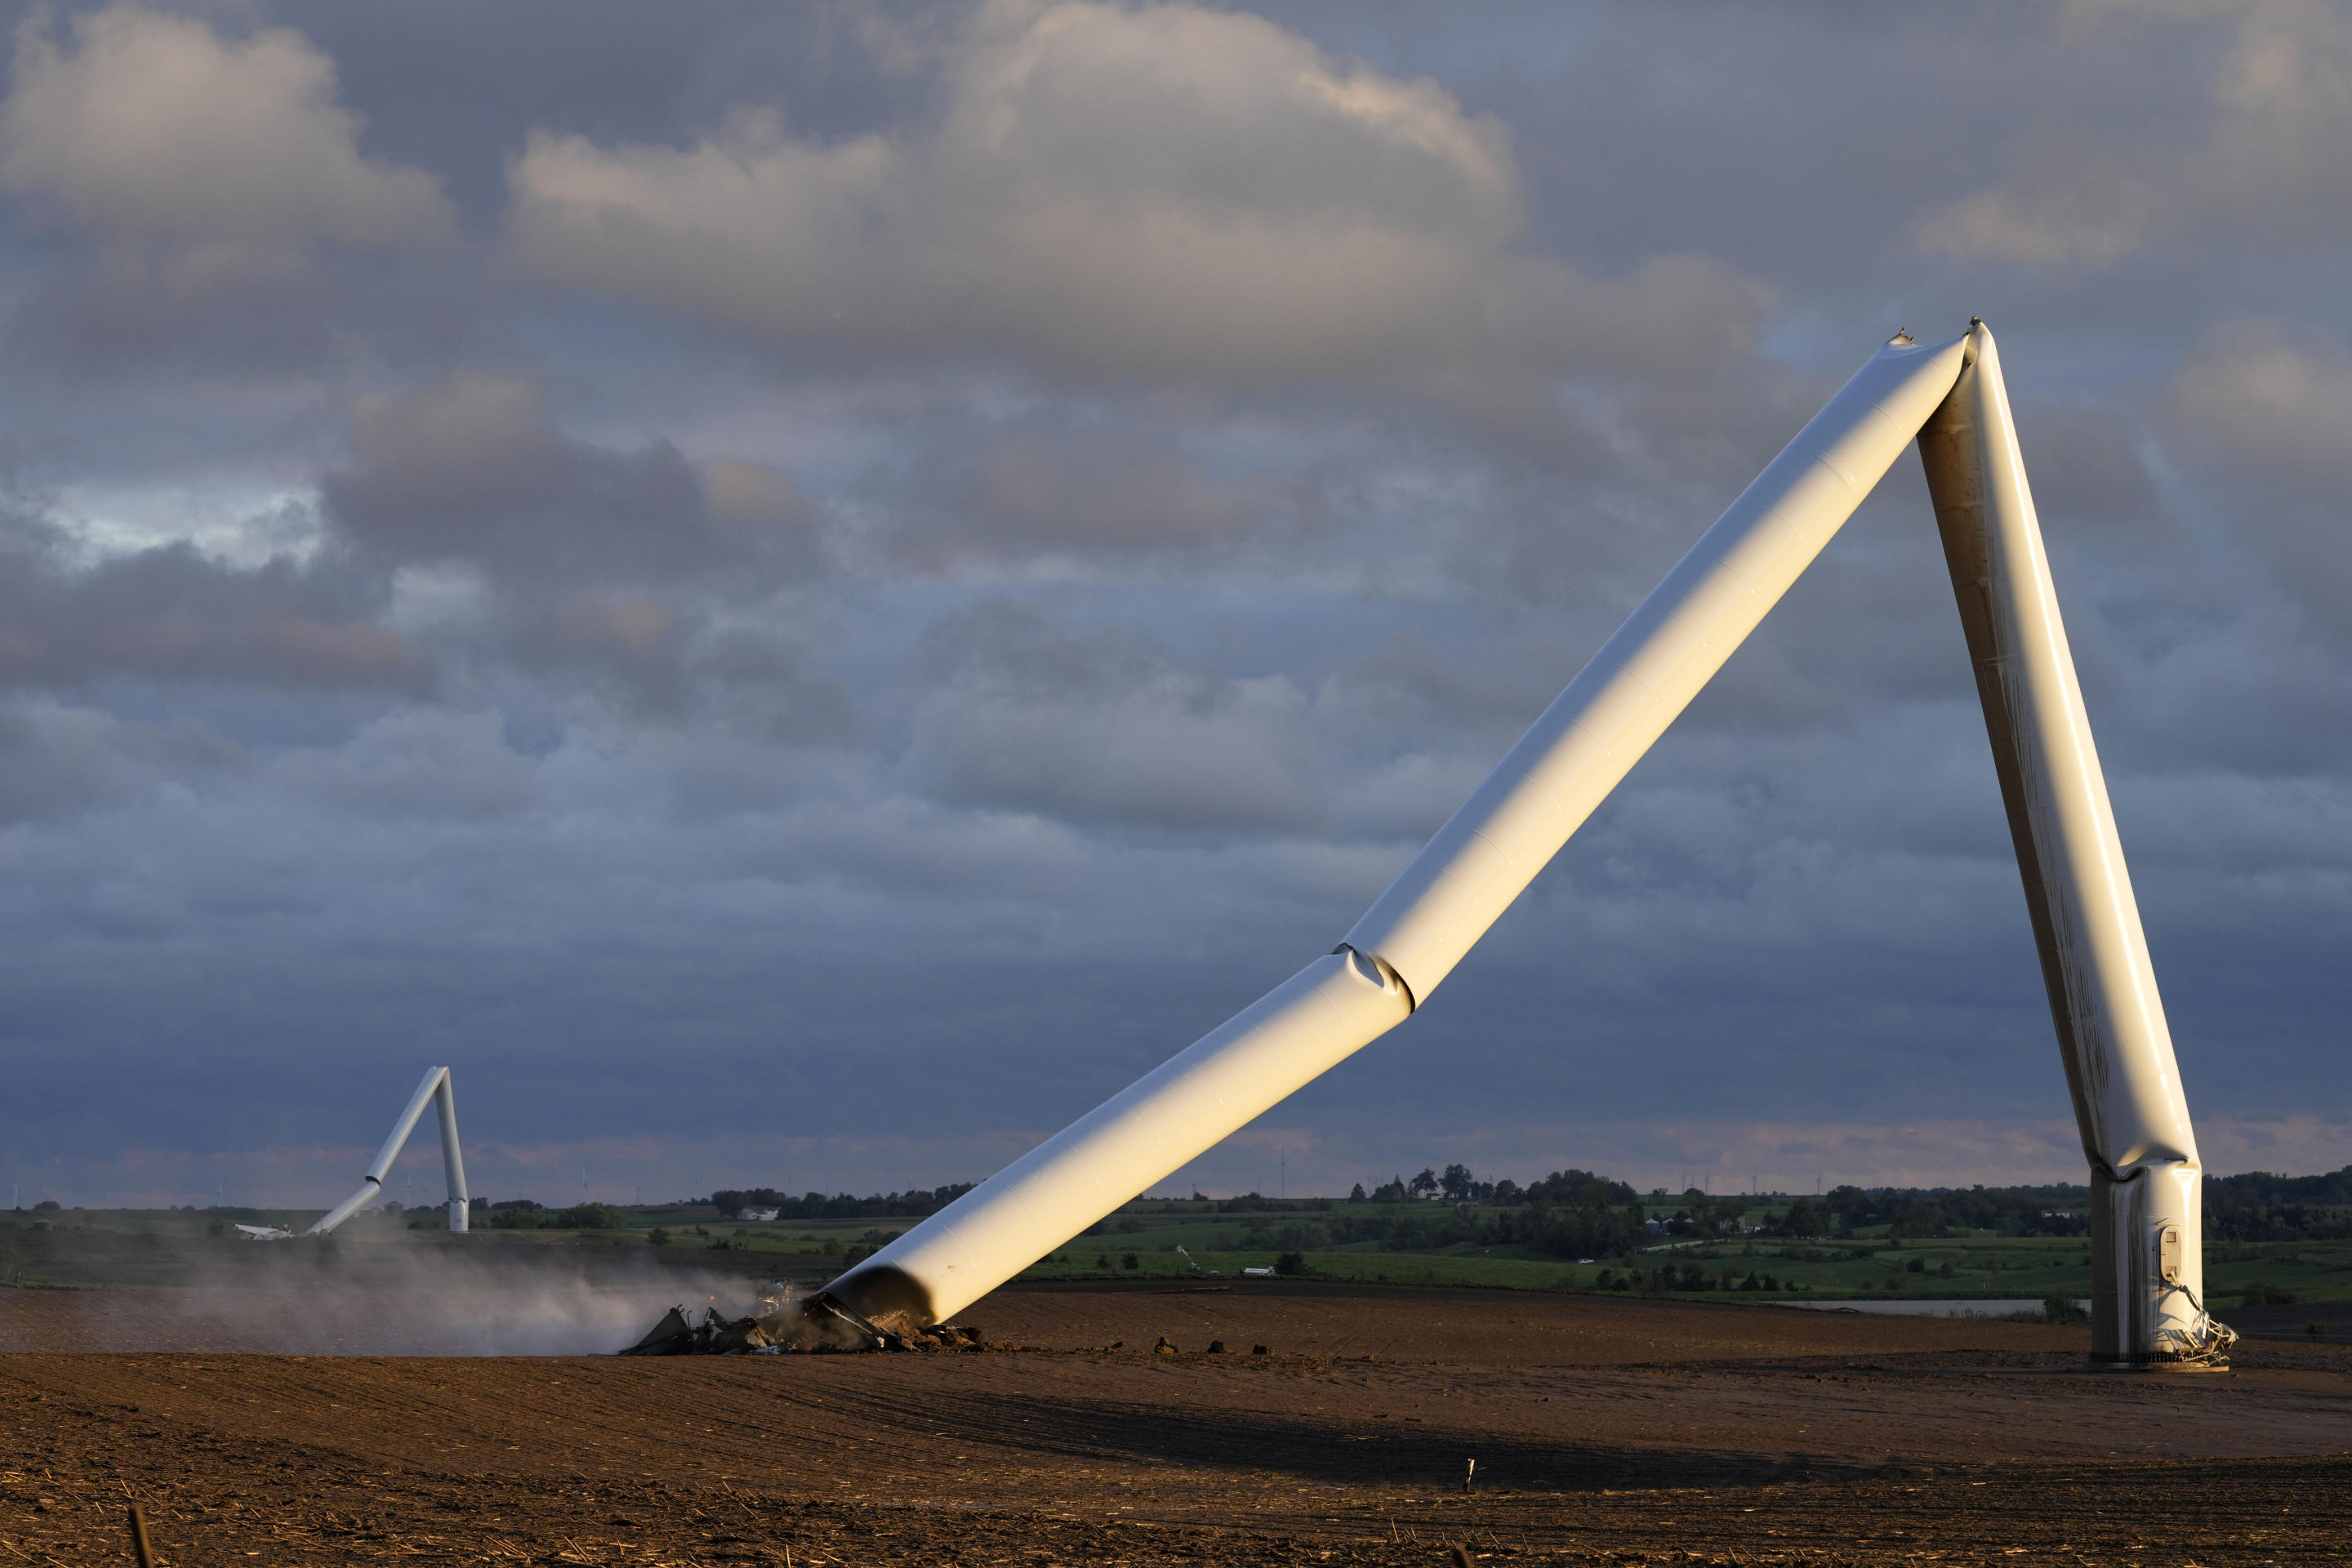 The remains of a tornado-damaged wind turbine touch the ground in a field on Tuesday, near Prescott, Iowa. (Charlie Neibergall/AP)